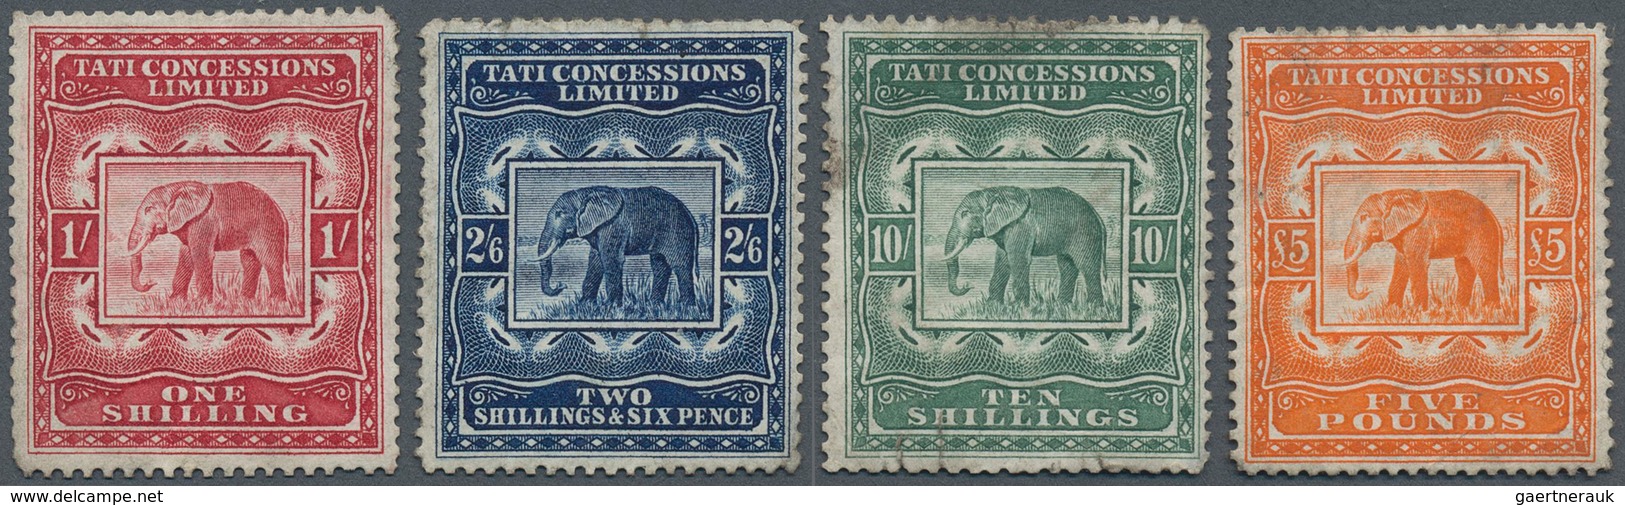 Thematik: Tiere-Elefanten / Animals Elephants: 1896, Bechuanaland, 4 Used Revenue Stamps Issued By T - Eléphants